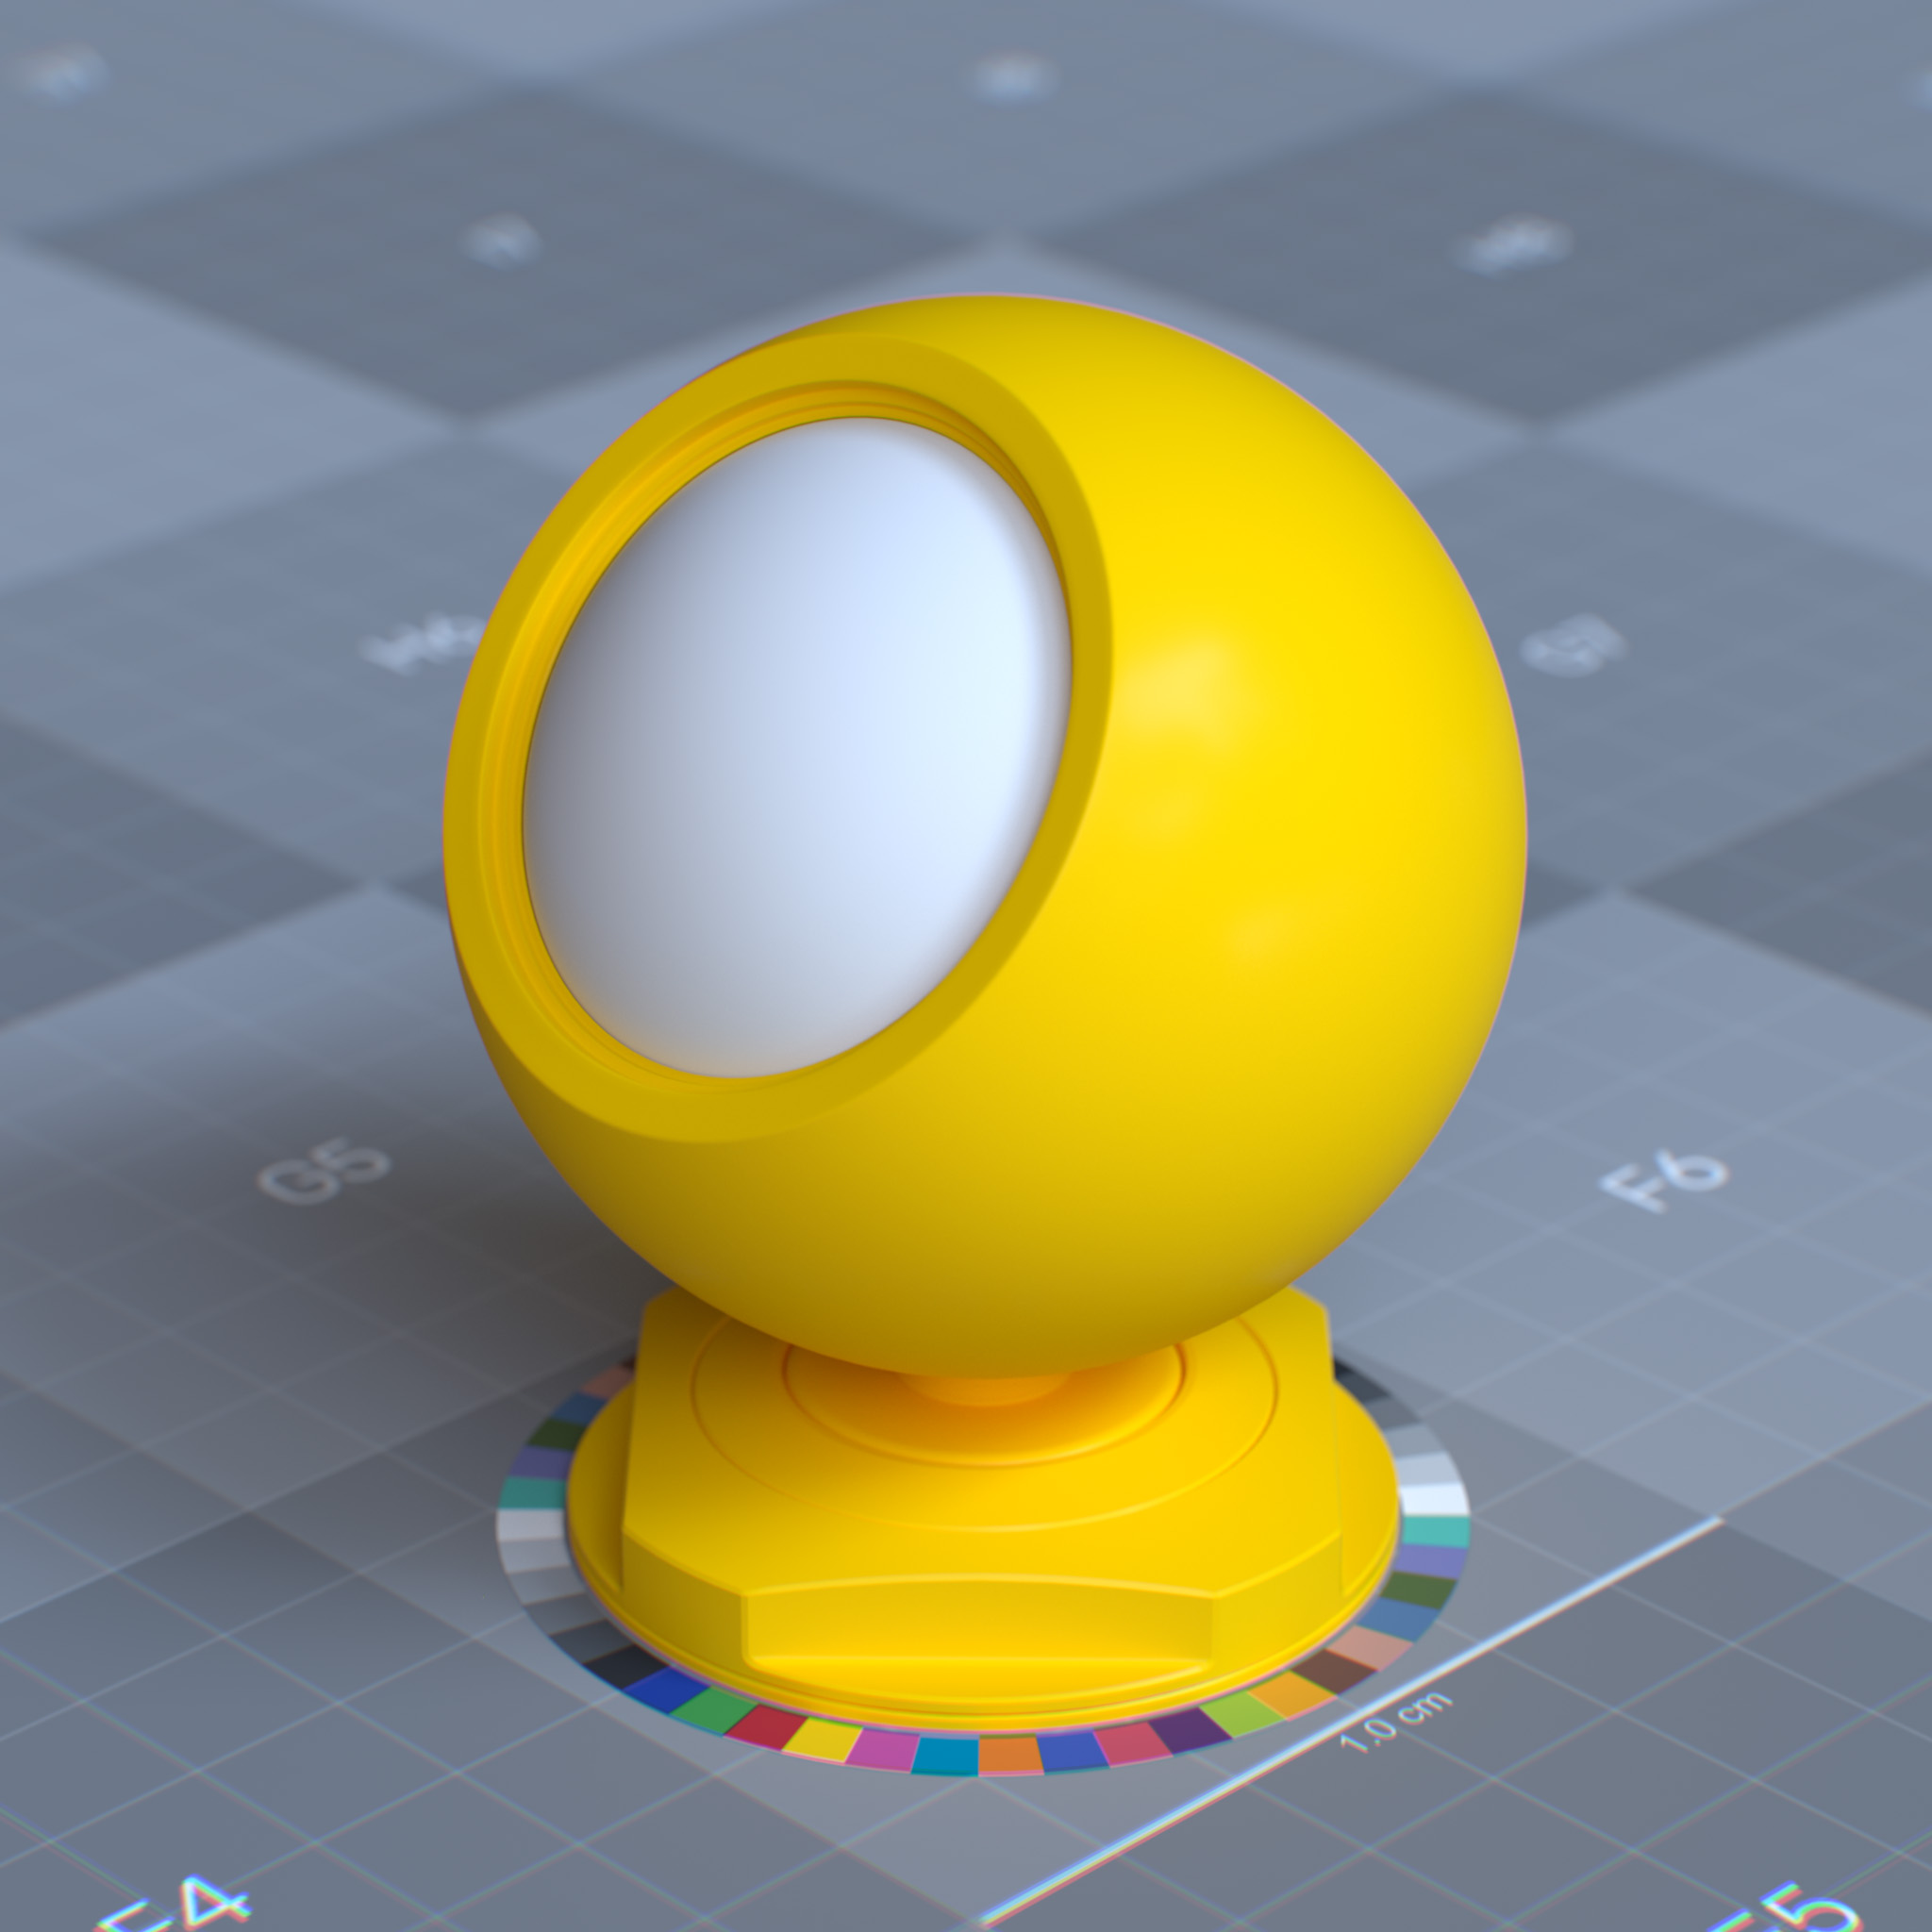 rtx_material_omnisurfacebase_diffuse_reflection_color_0p95_0p55_0p0